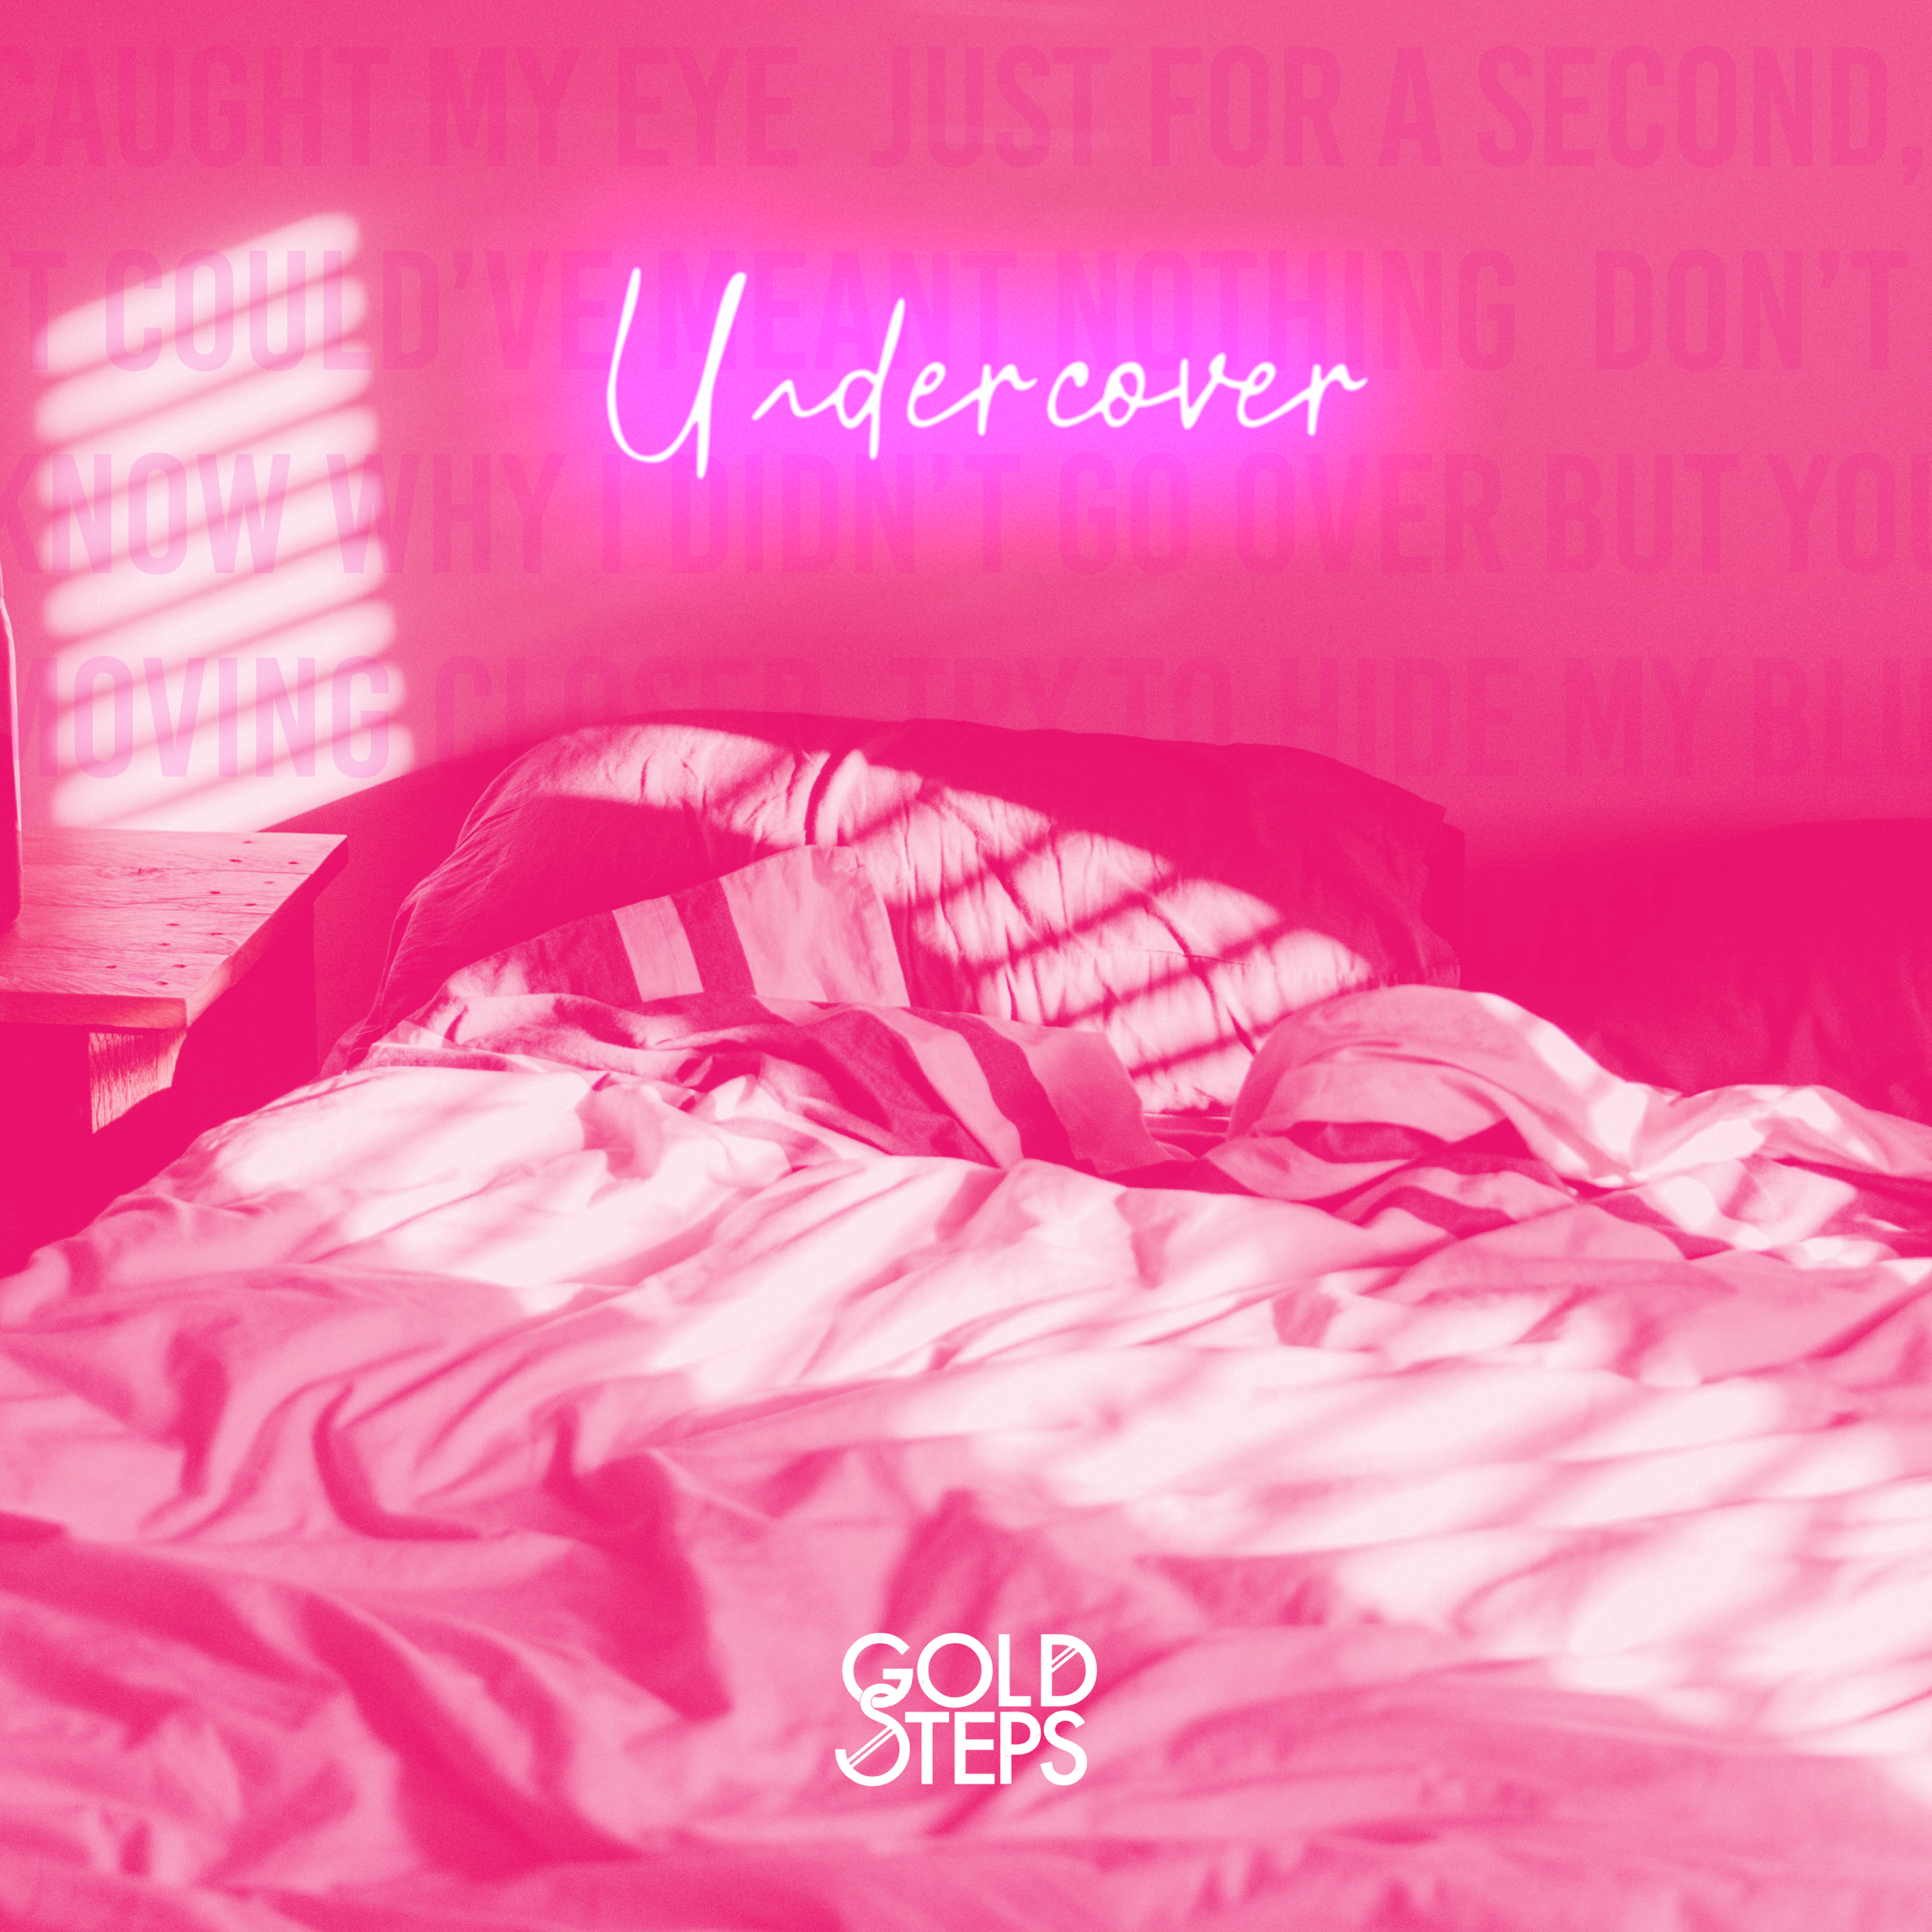 Gold Steps - "Undercover"